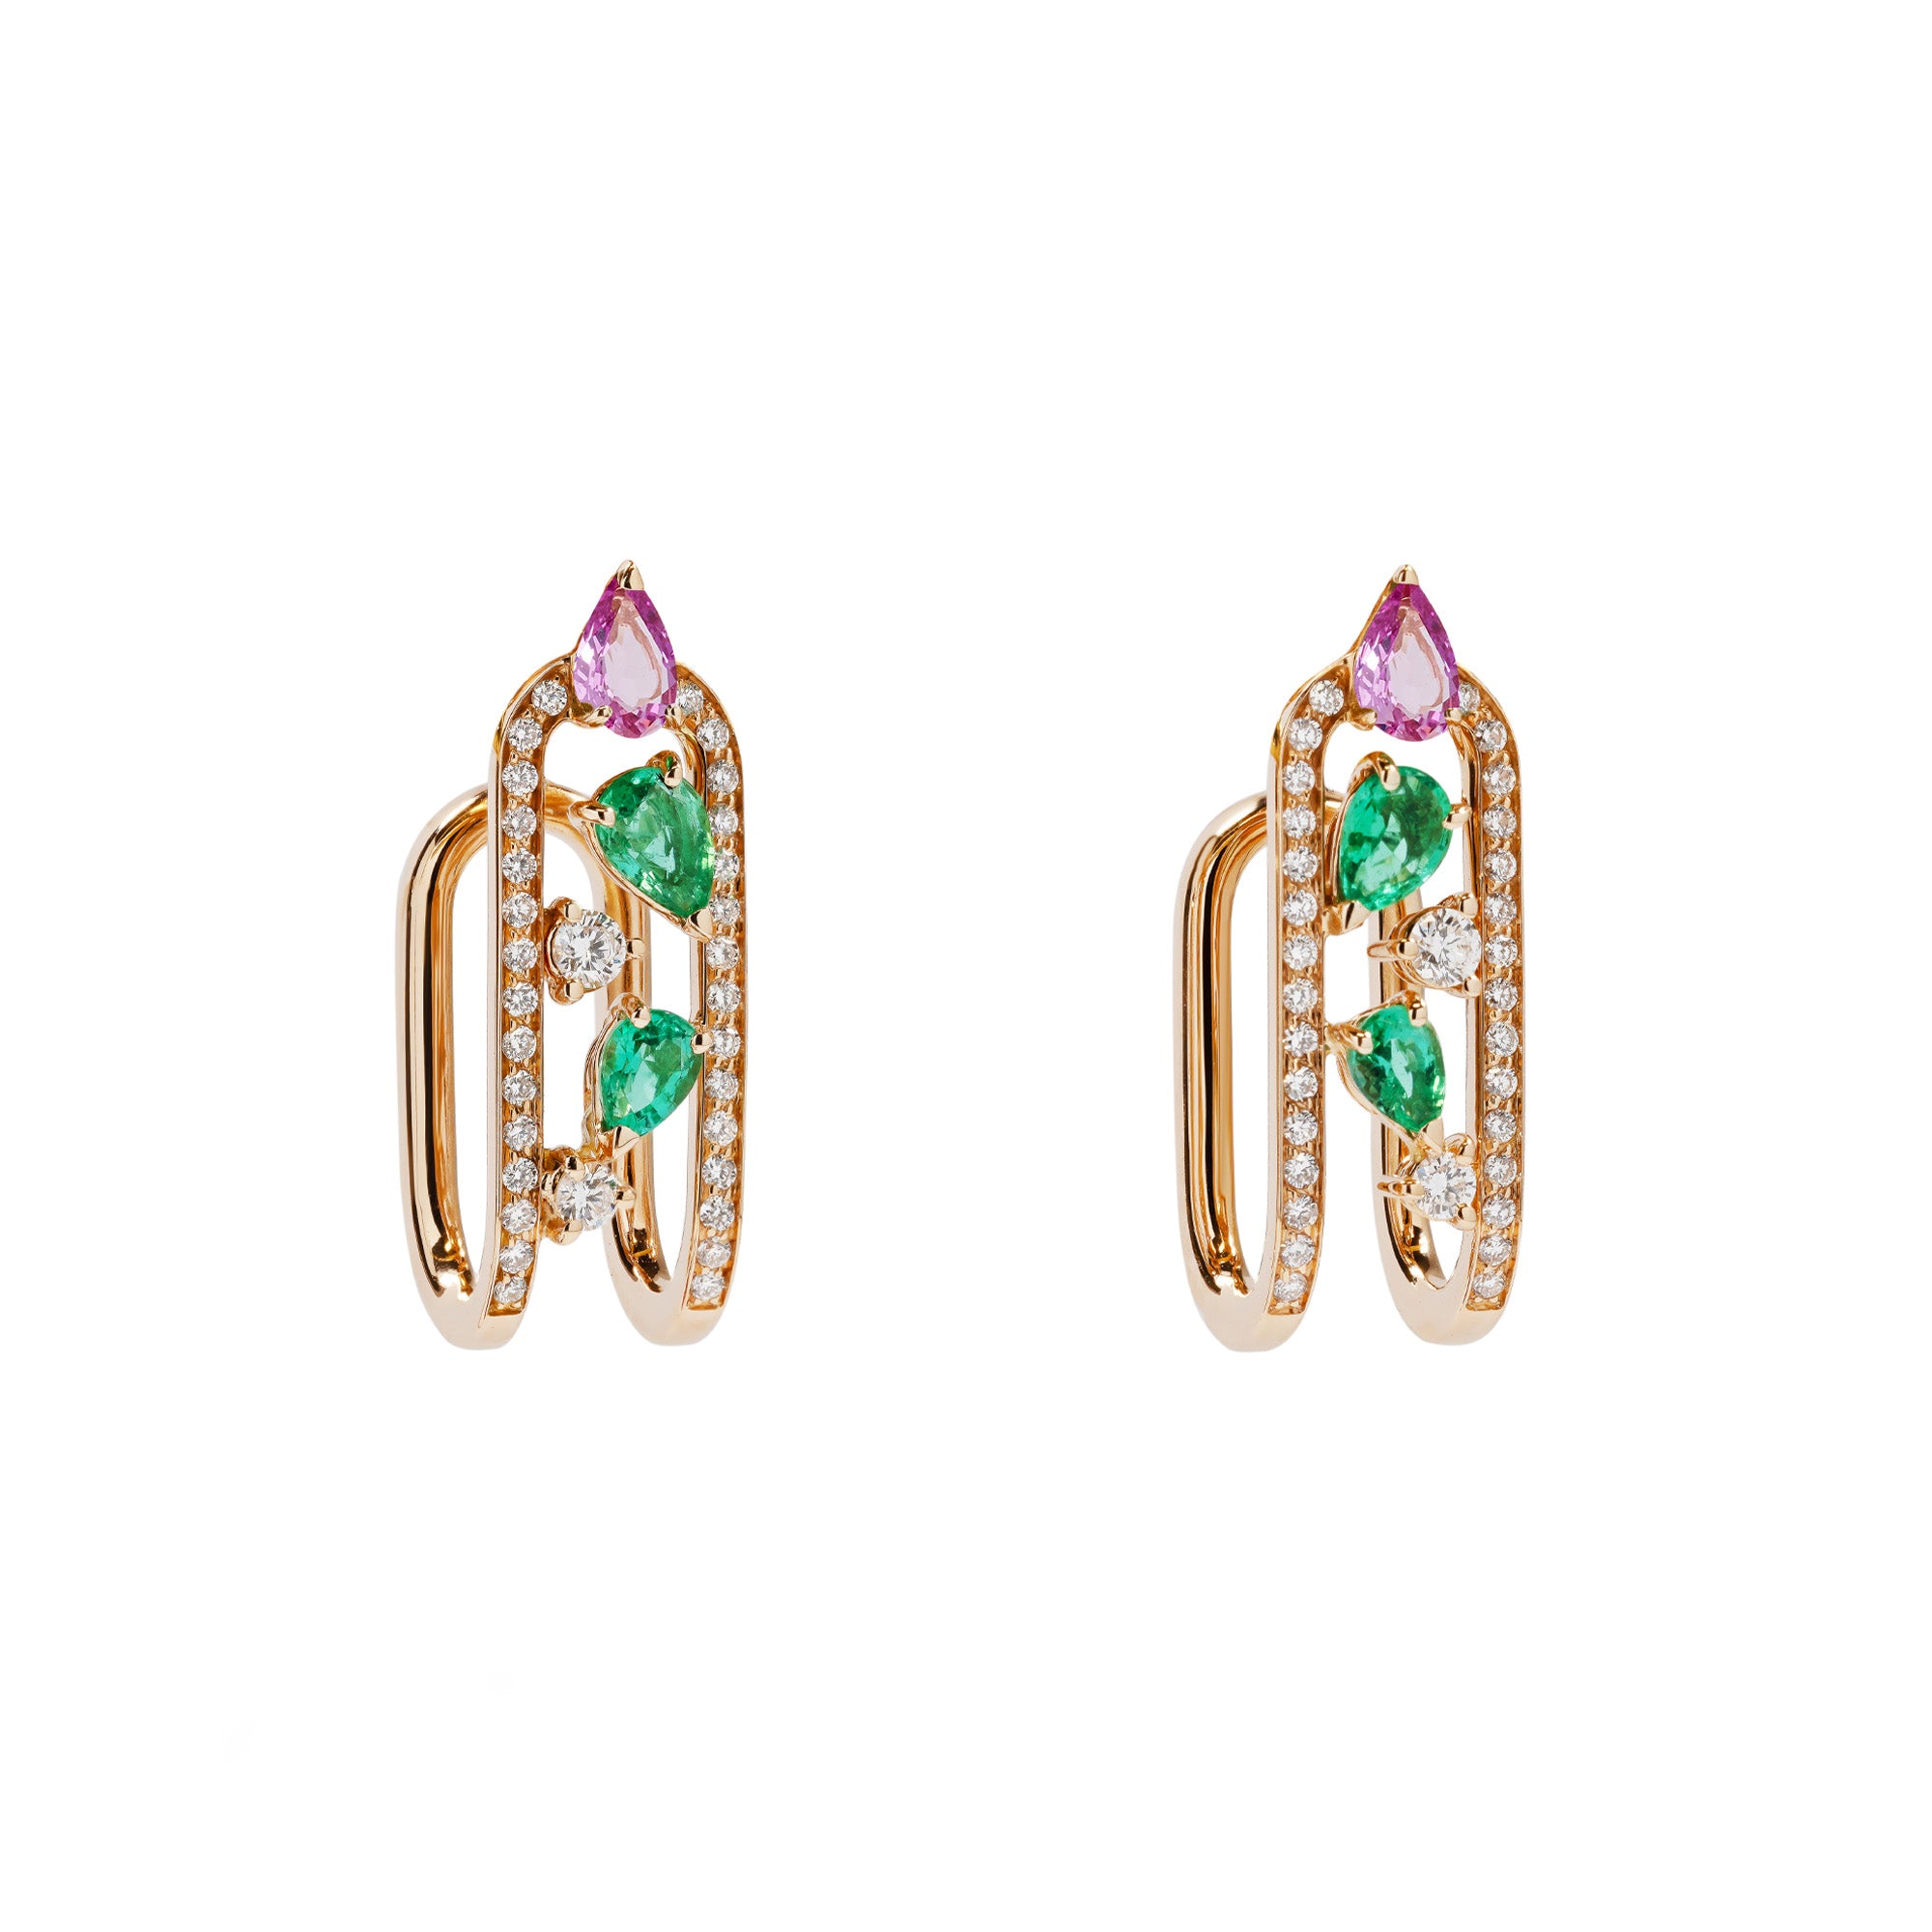 Clip Rose Gold Earrings With Emeralds Pink Sapphires And Diamonds